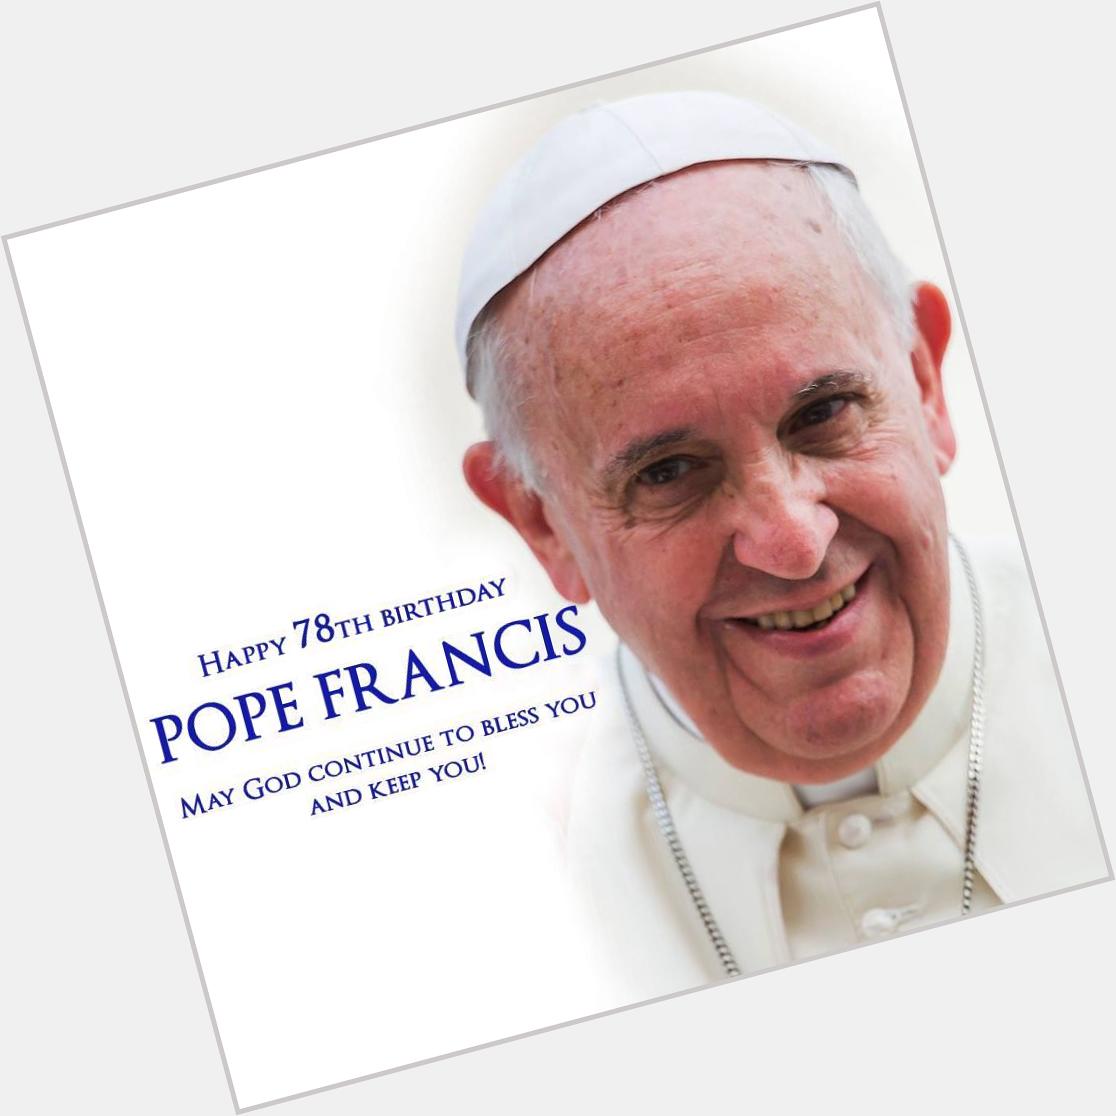 Happy Birthday Pope Francis!! Join us in praying for and his special intentions on his 78th birthday. 